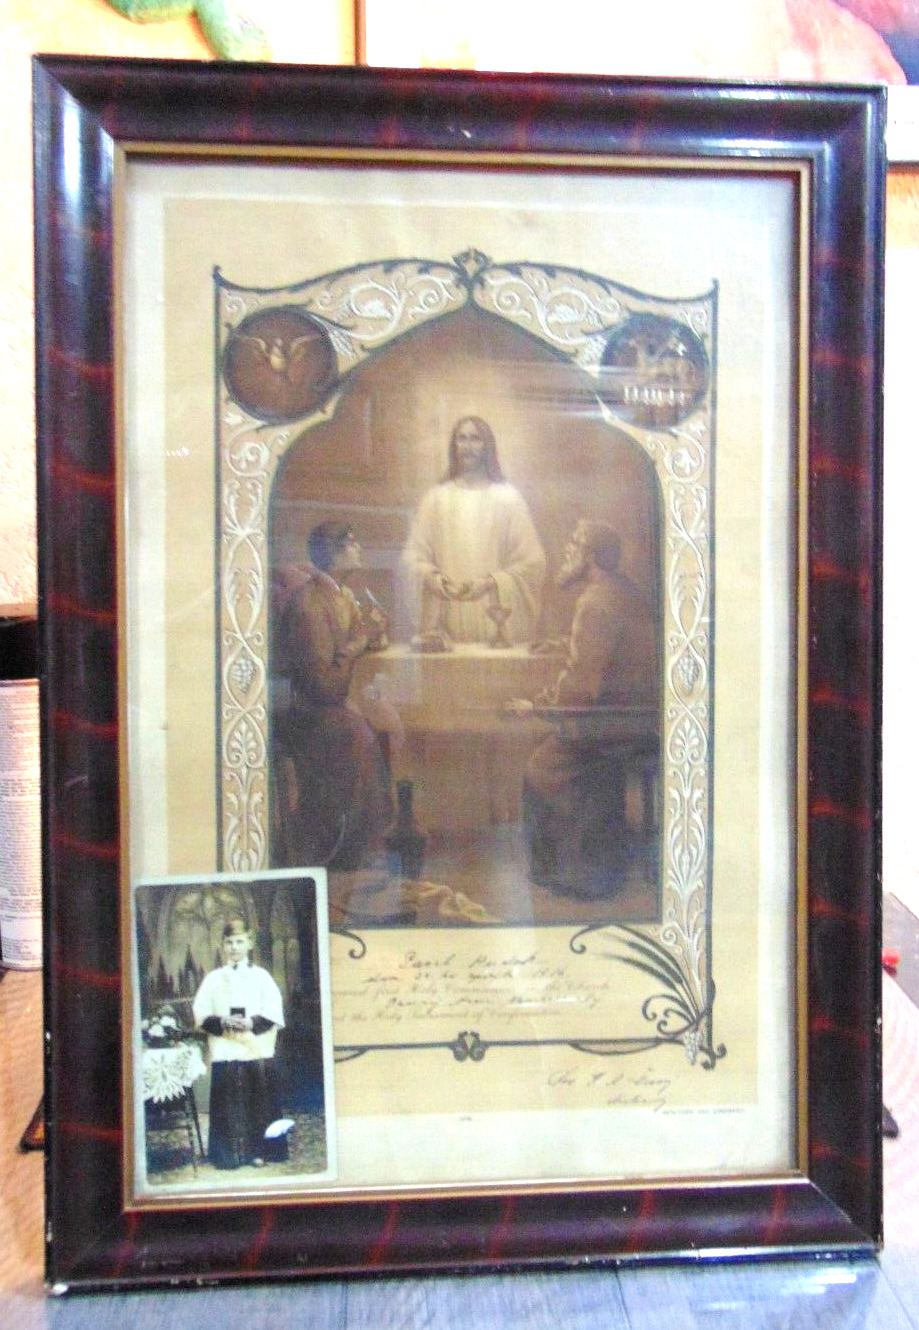 VTG. Religious Holly Communion Cetificate 1916 Tortis Shell Looking Frame Glass